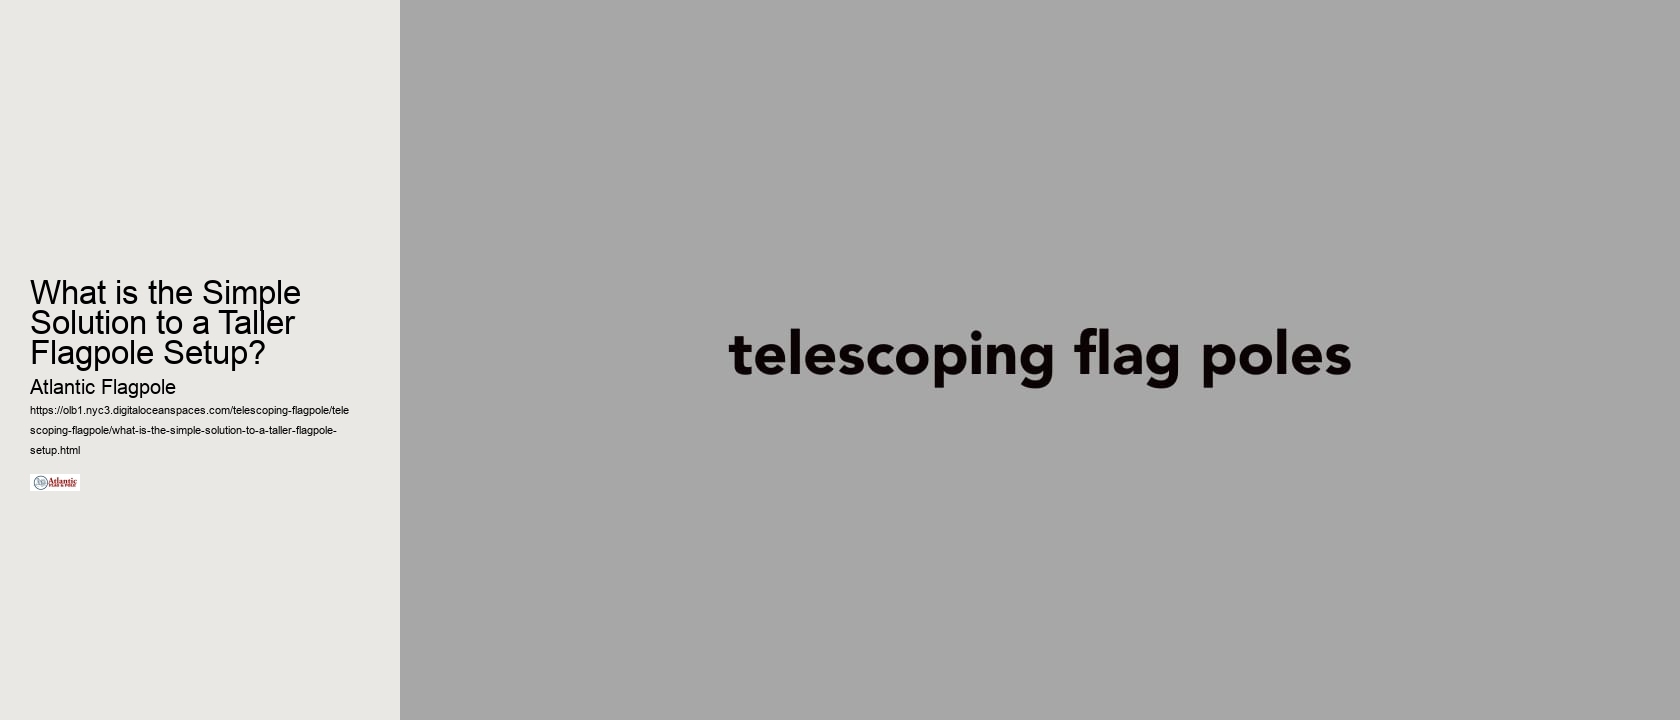 What is the Simple Solution to a Taller Flagpole Setup?